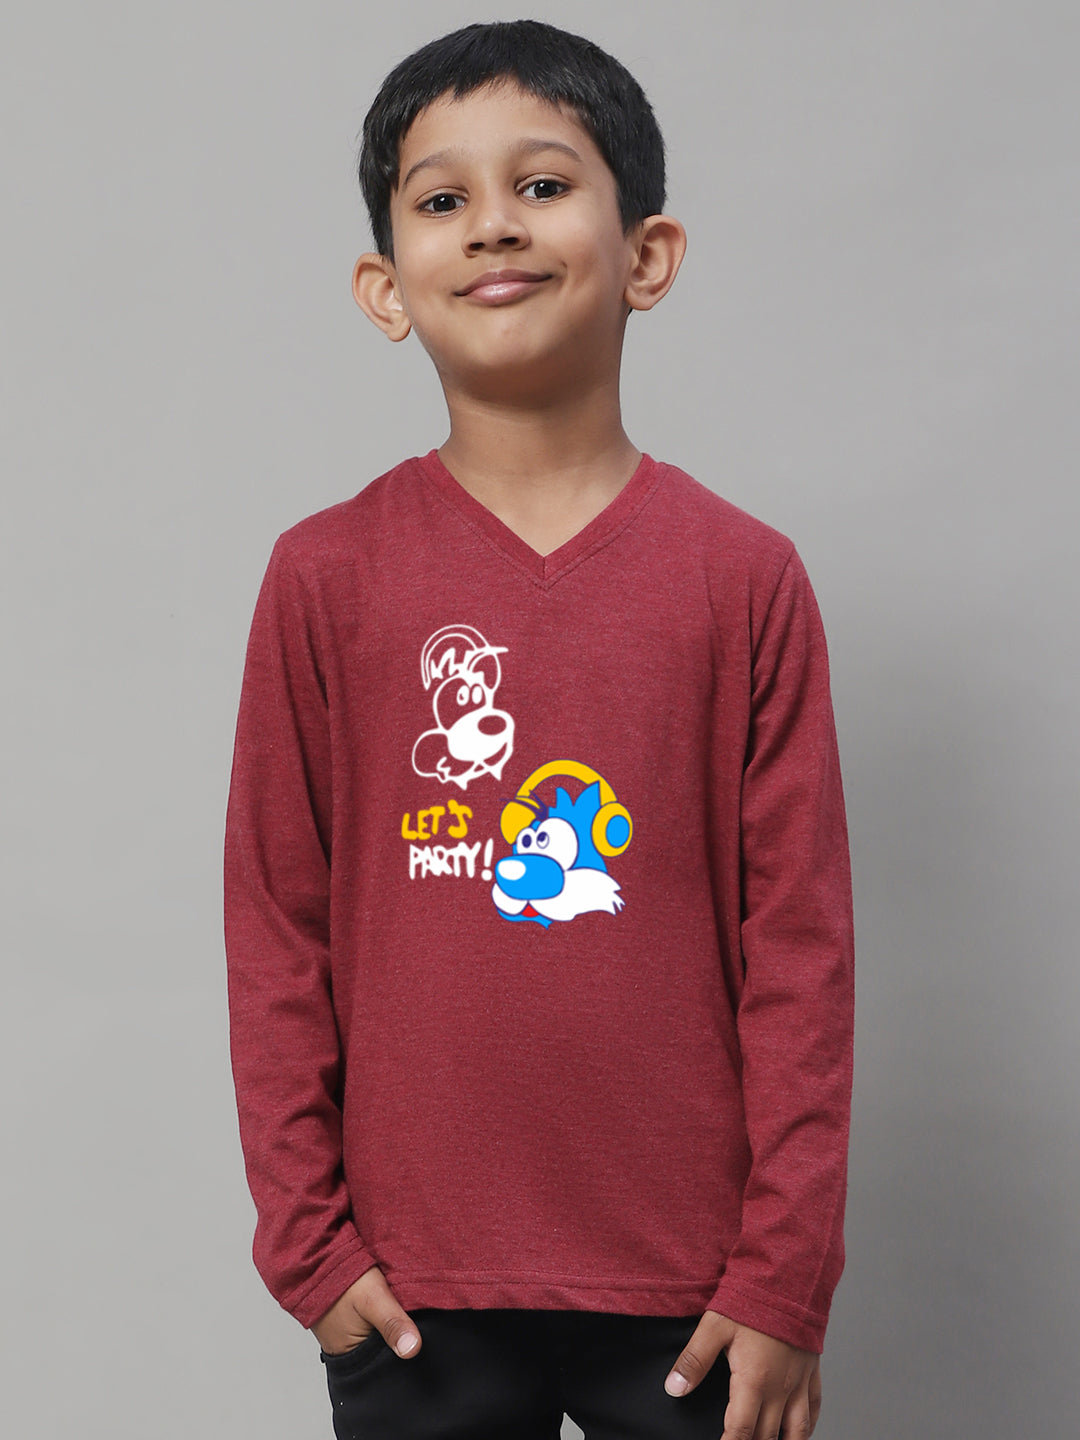 Boys Lets Party Casual Fit Printed T-Shirt - Friskers